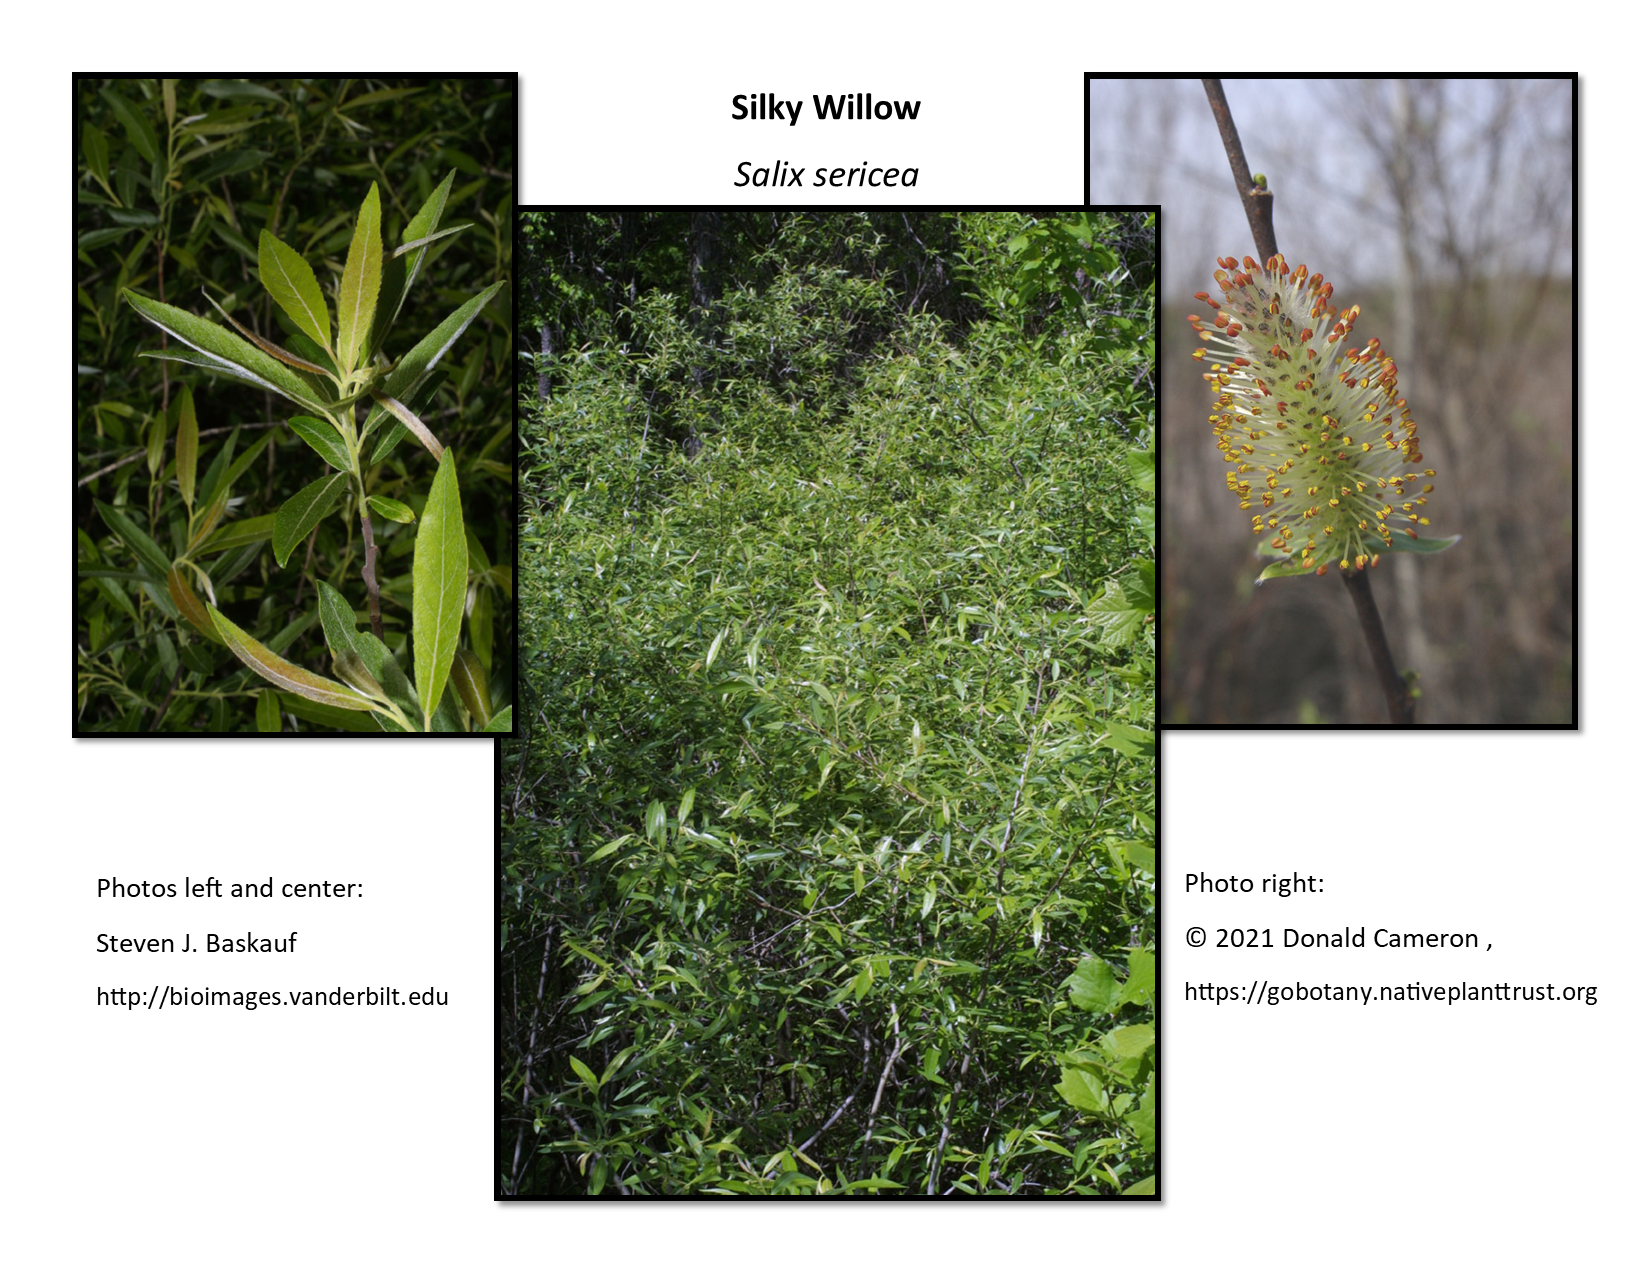 Silky Willow